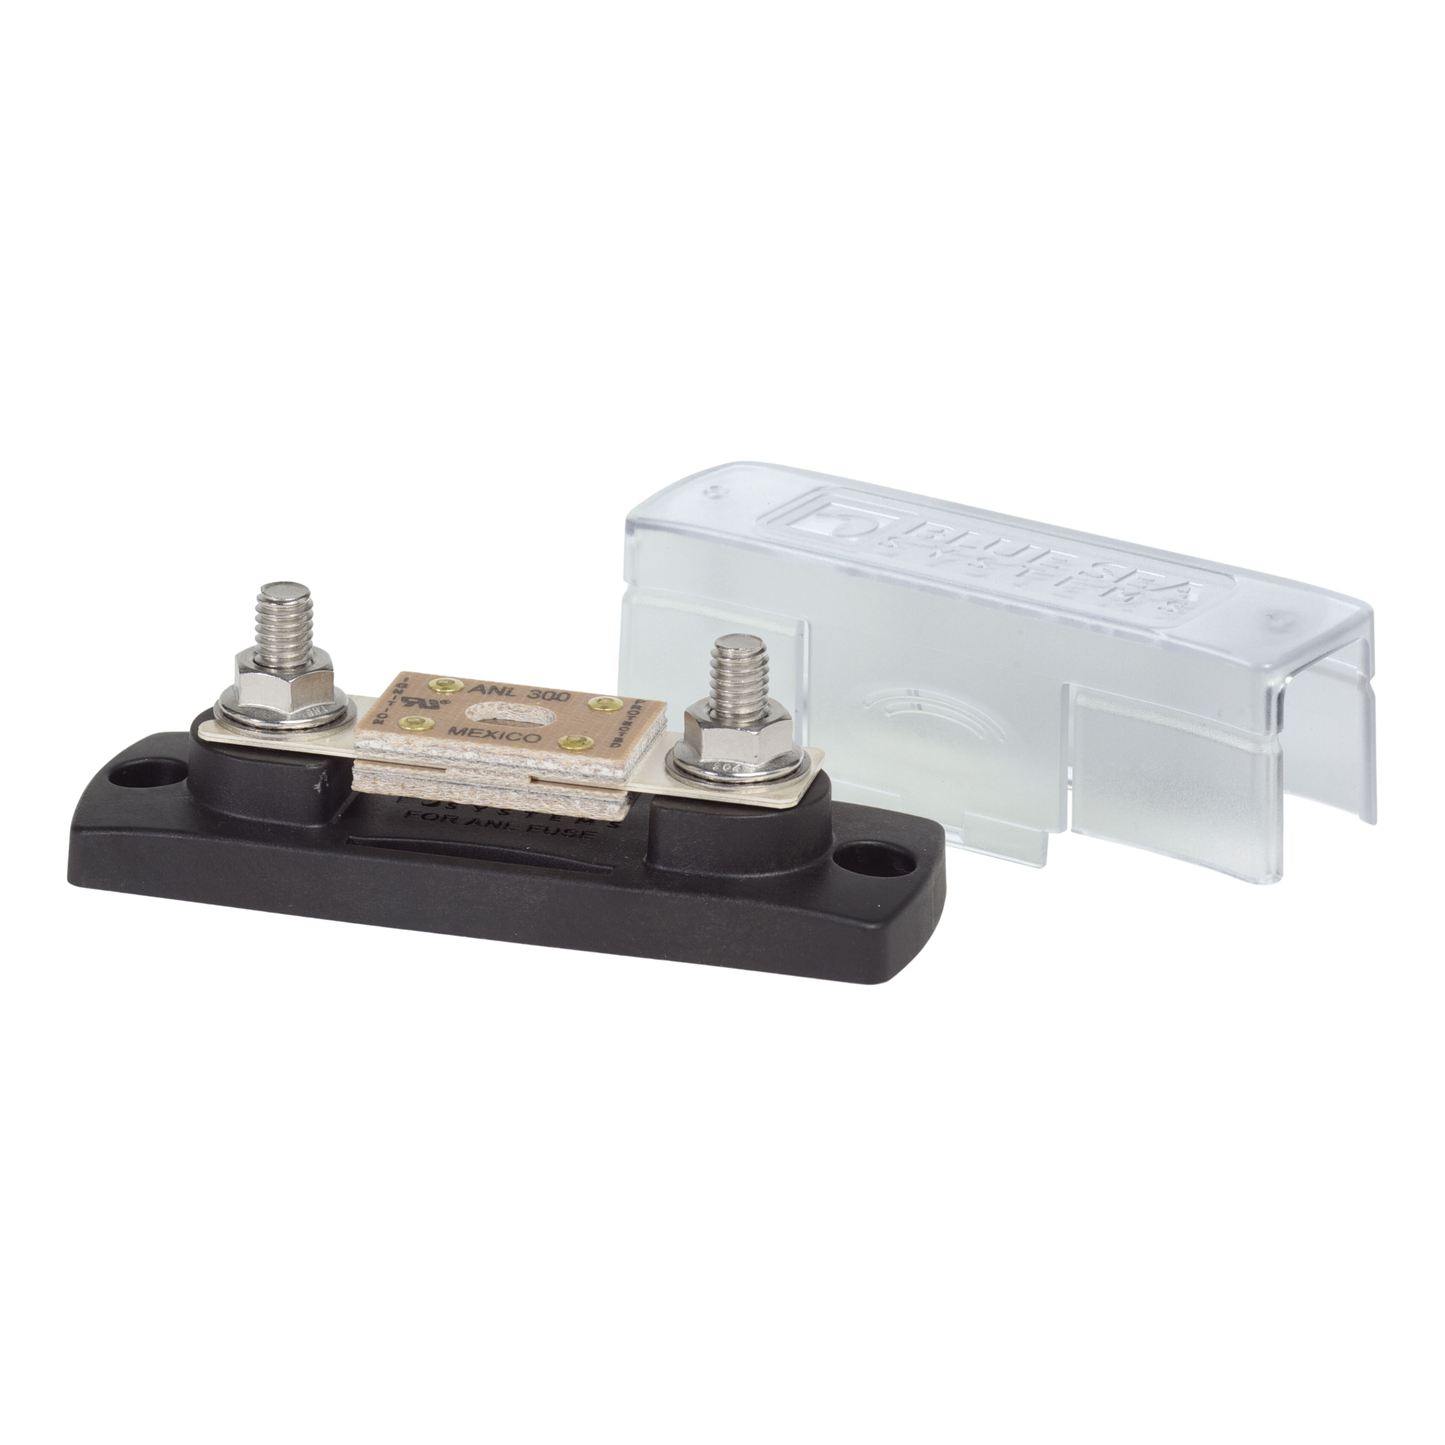 ANL Fuse Block with Insulating Cover - 35 to 300A;32 Volts DC - Blue Sea Systems